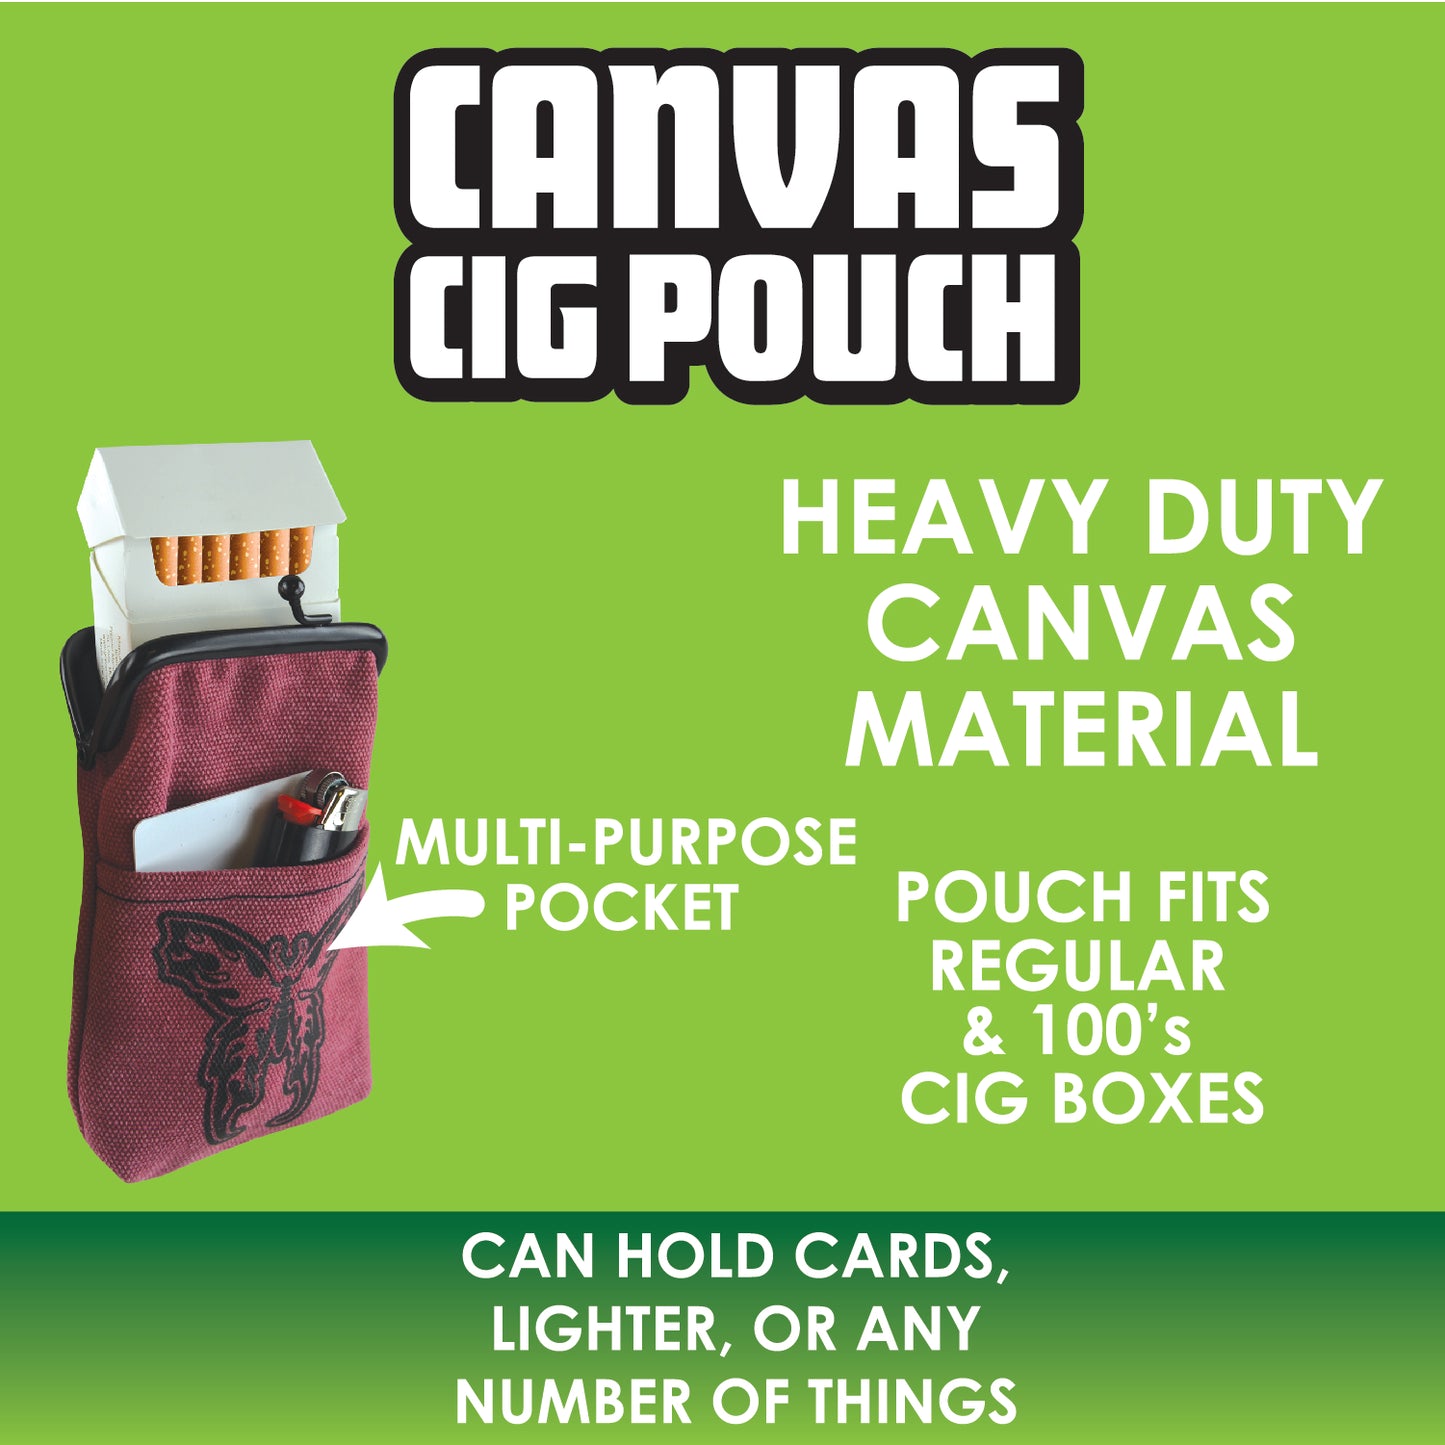 ITEM NUMBER 041382 CANVAS CIG POUCH 6 PIECES PER DISPLAY